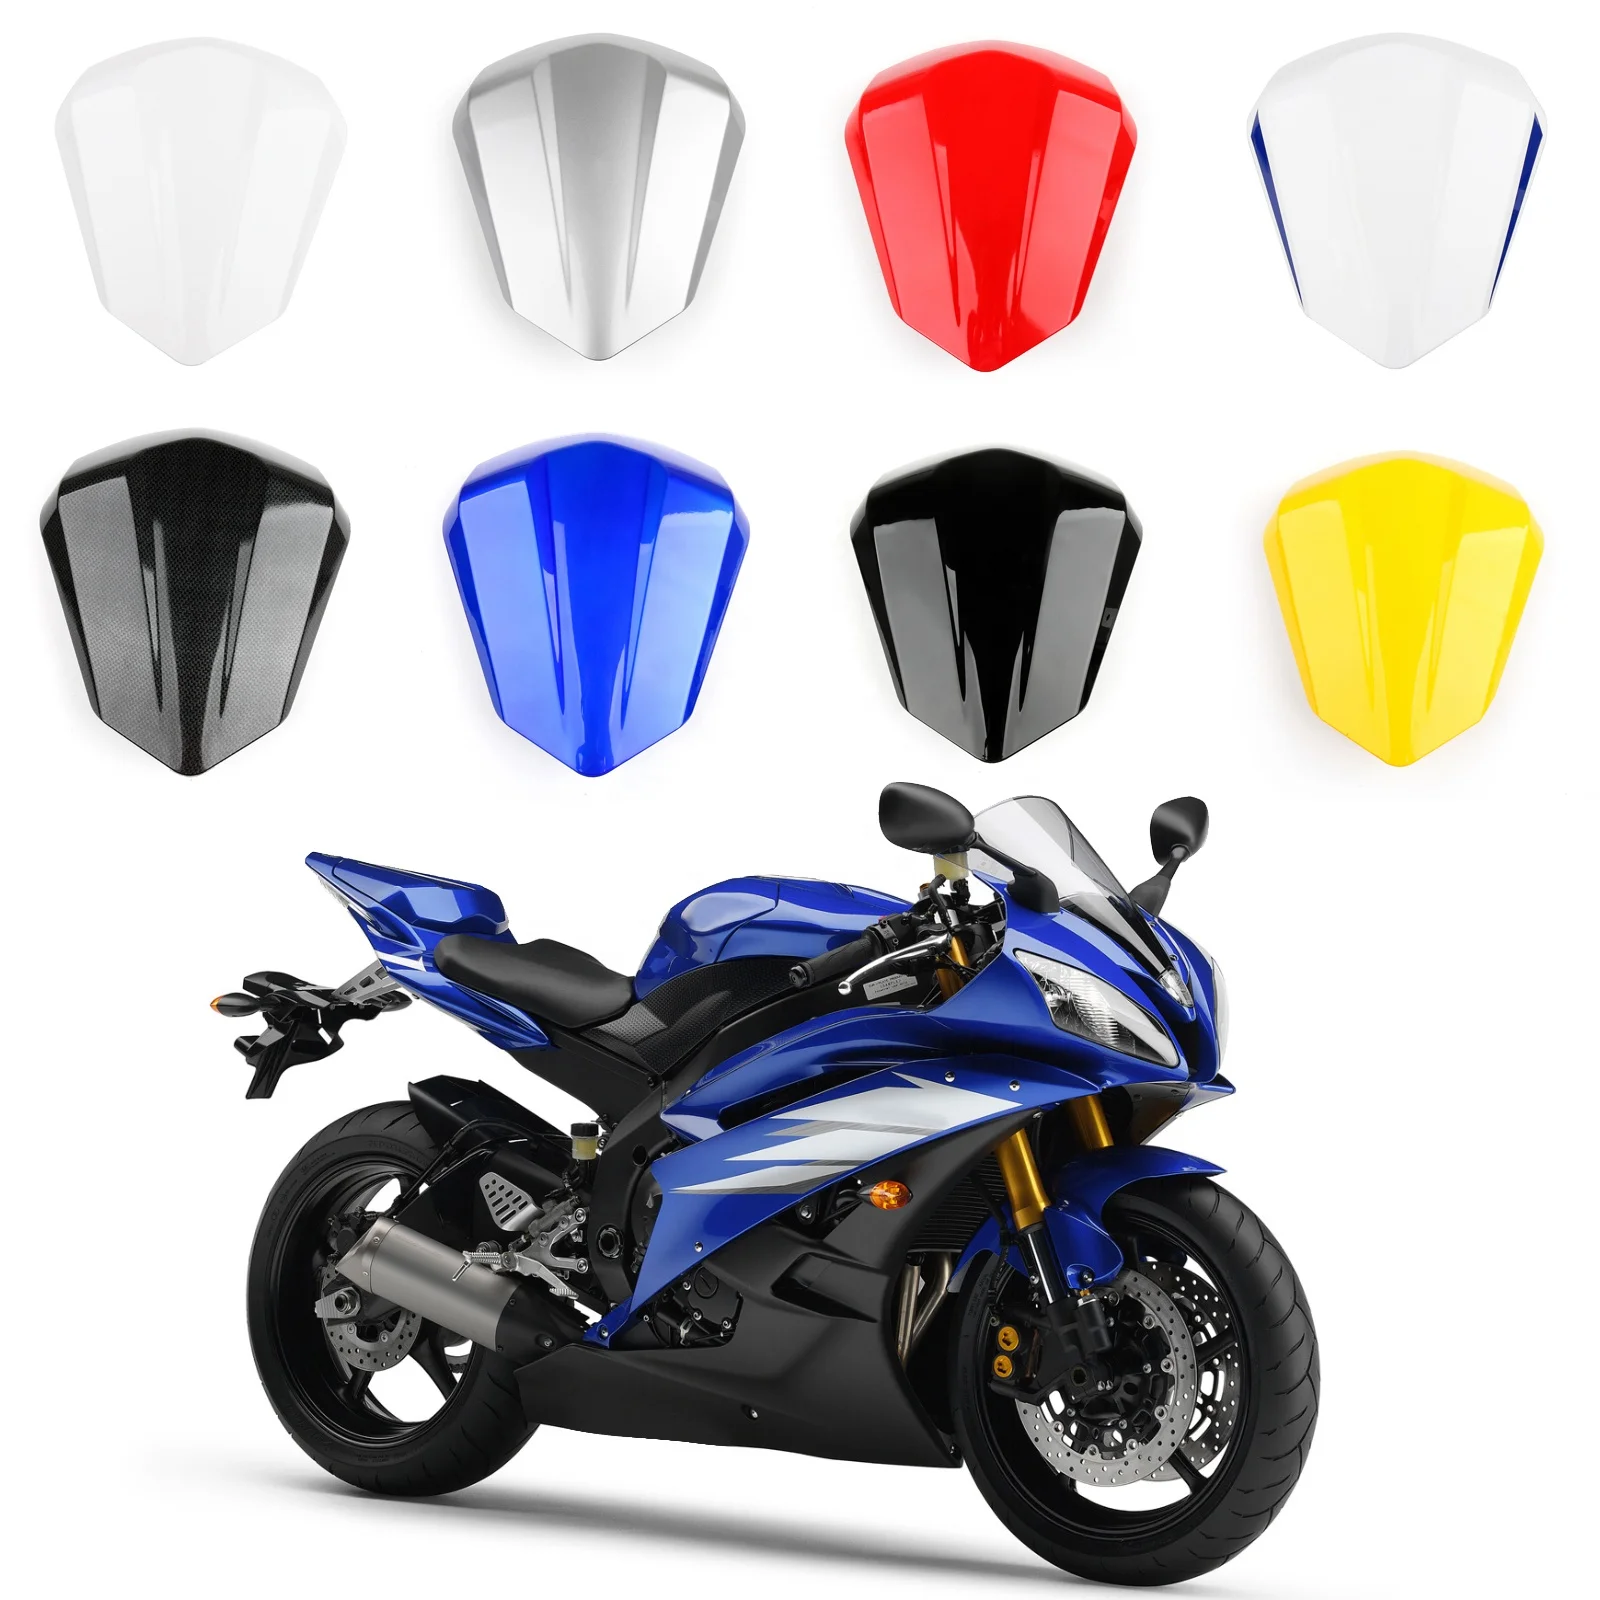 ABS Plastic Rear Seat Cowl Fairing Cover For Yamaha YZF R6 2006-2007